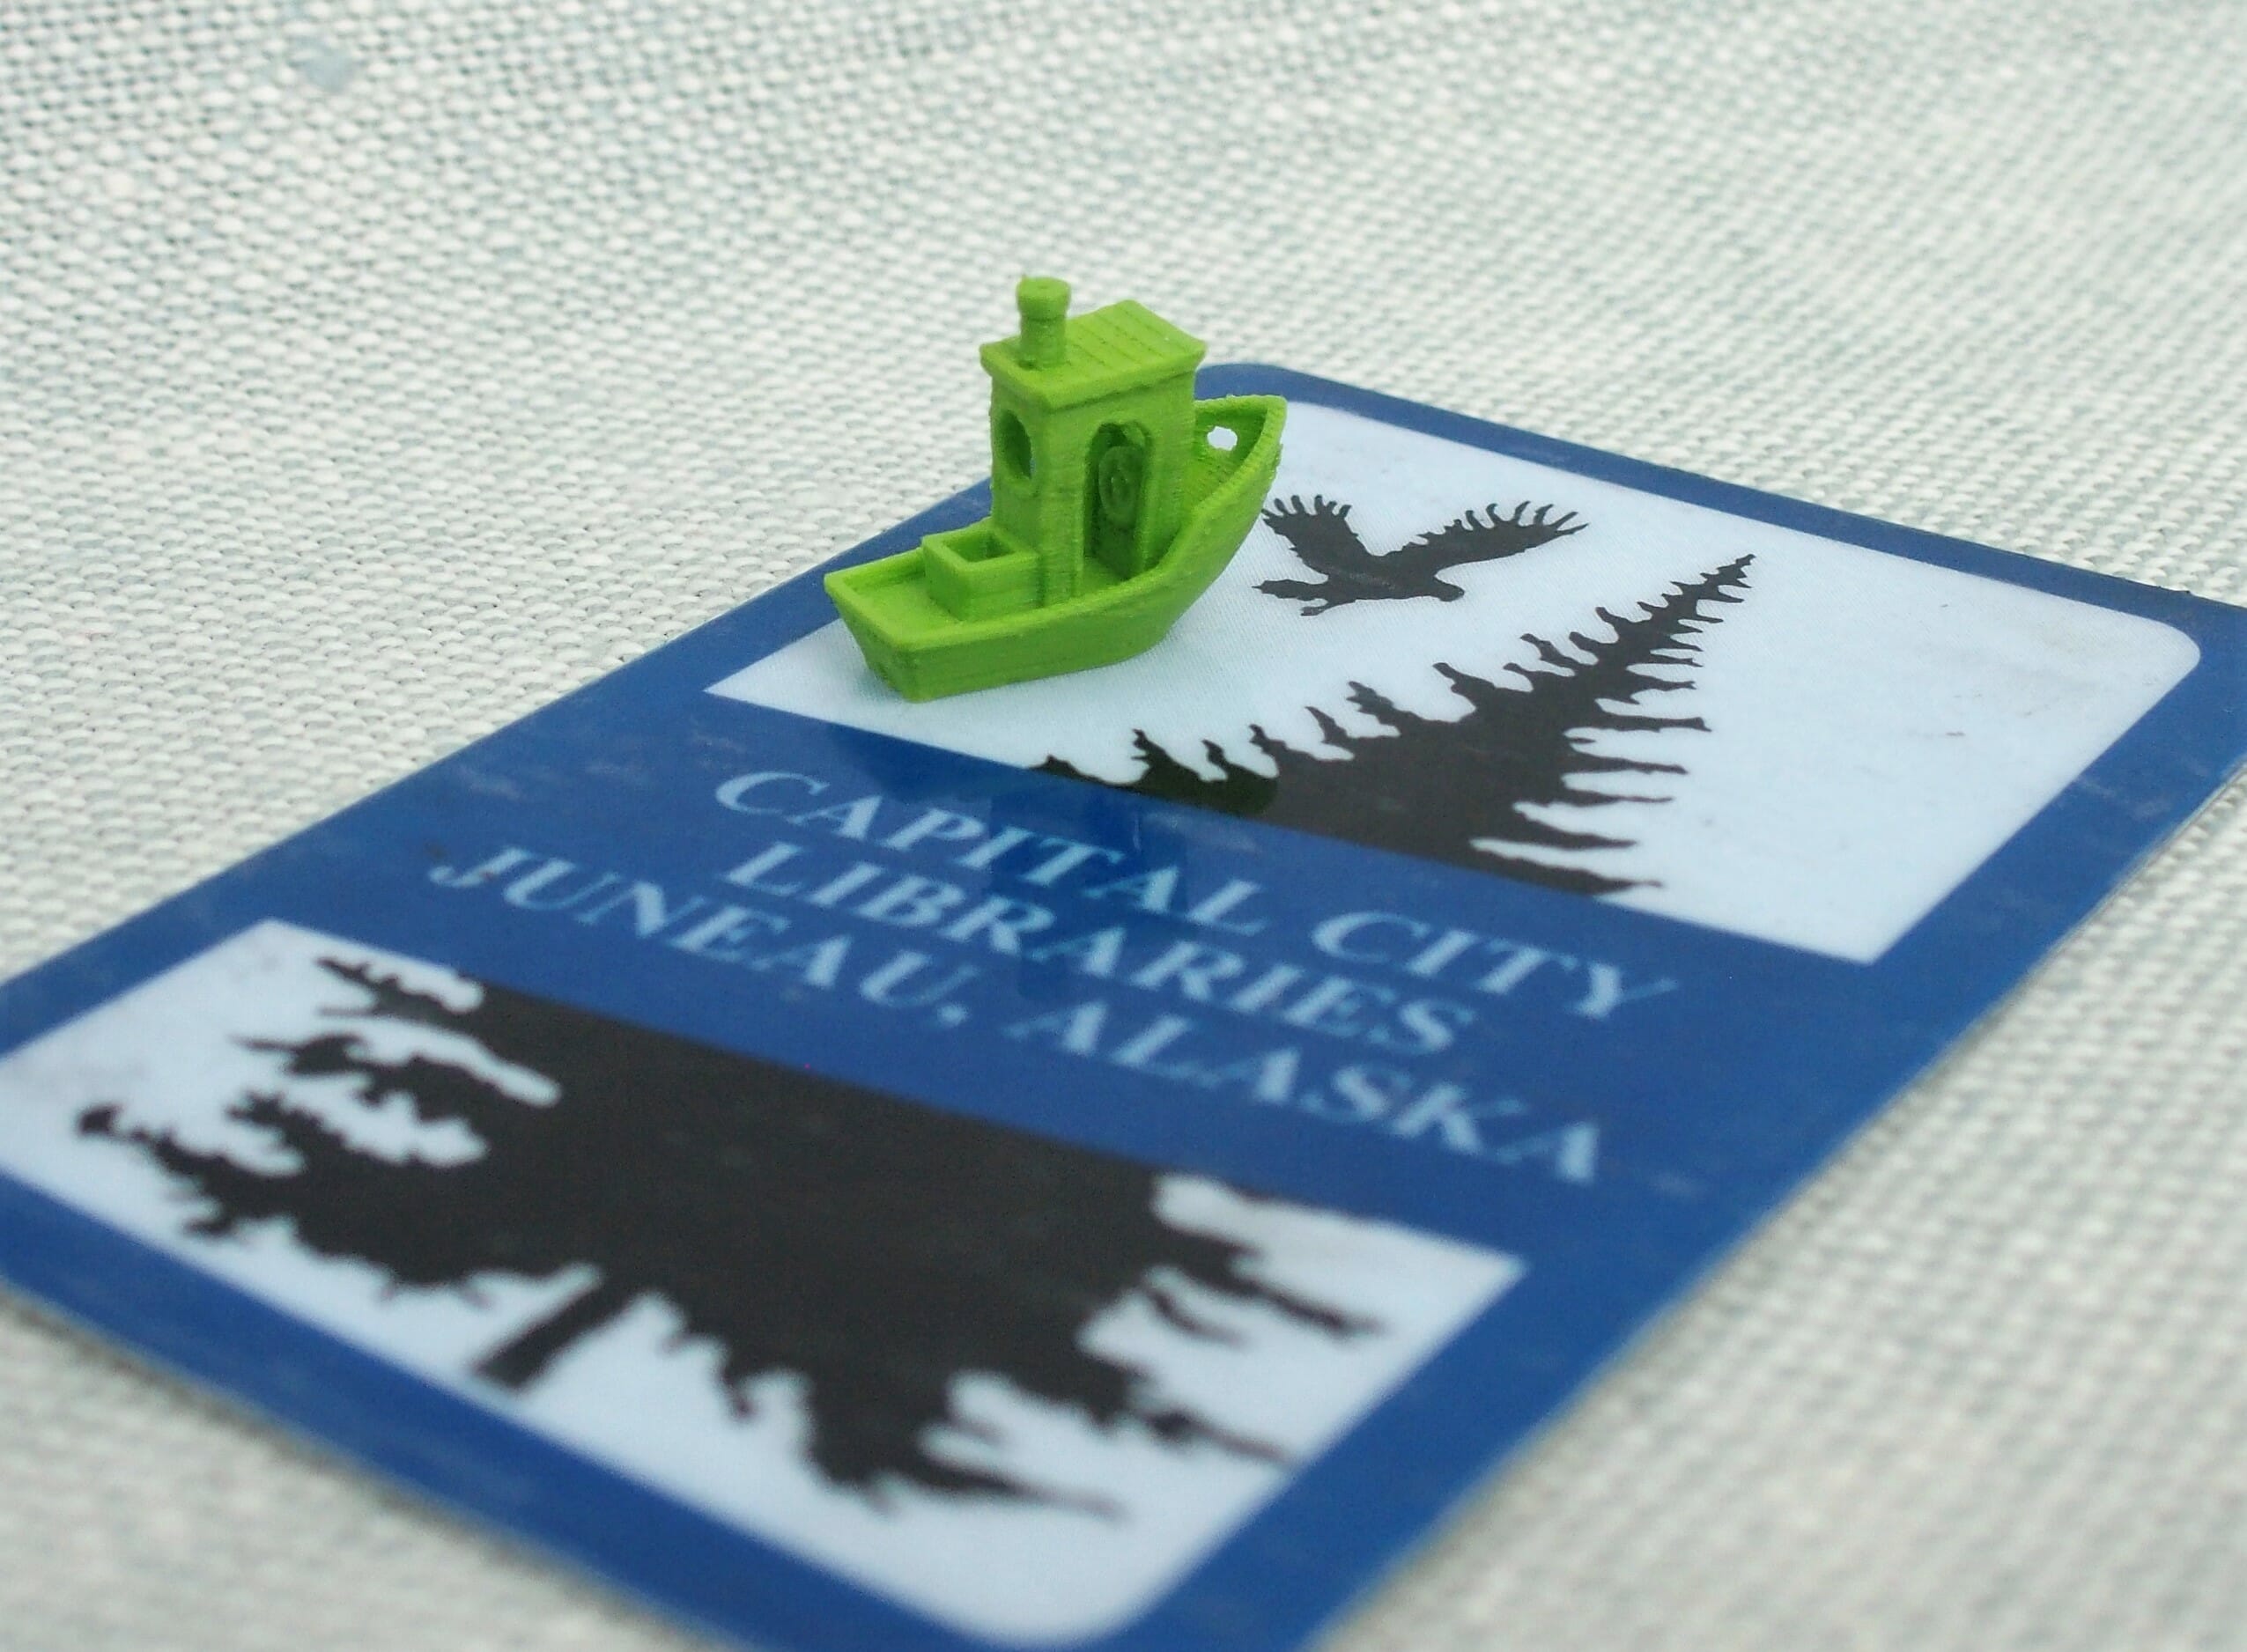 Photo of a small boat model prined in green PLA, sitting on top of a JPL library card. Visible details include a steering wheel inside the cabin and a hole in the center of the chimney. Layer lines and some blobbiness is visible on the walls of the cabin and under the gunnels.